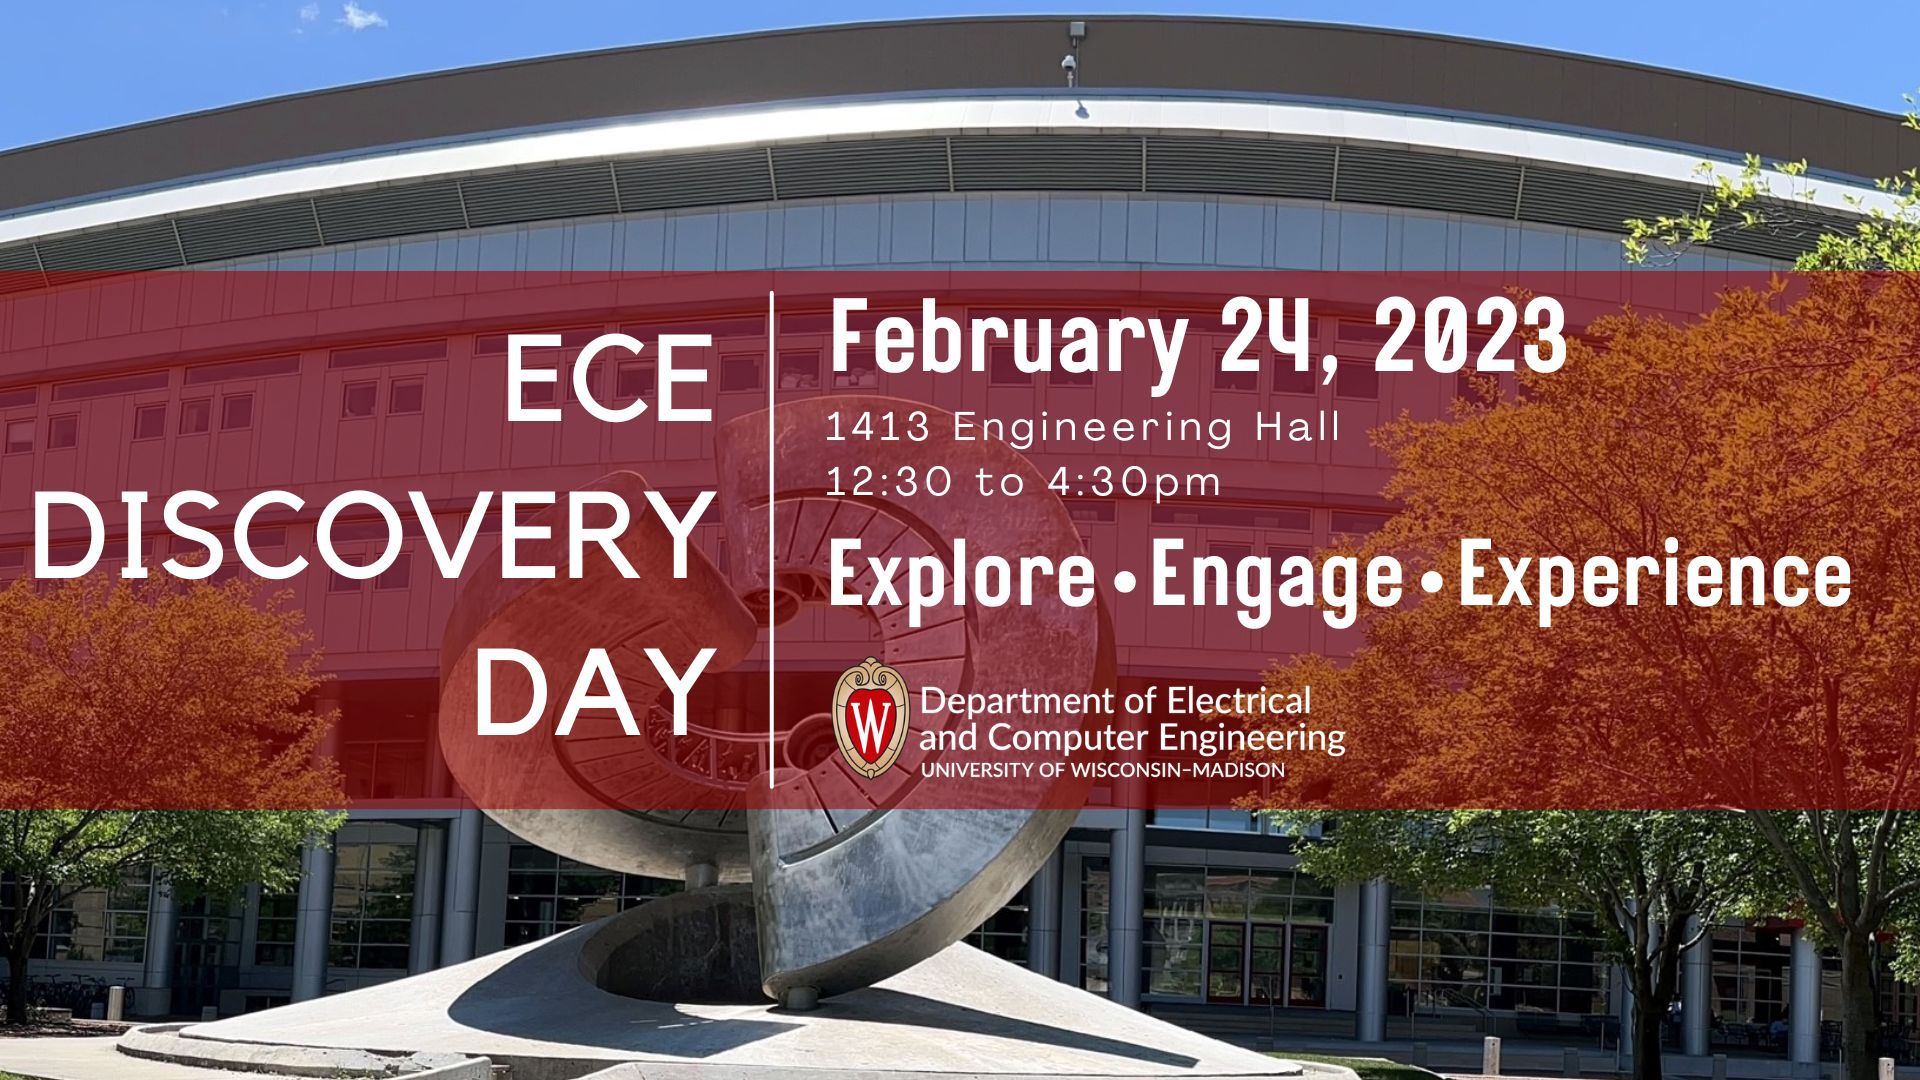 ECE Discovery Day, February 24, 2023, 1413 Engineering Hall, 12:30 to 4:30